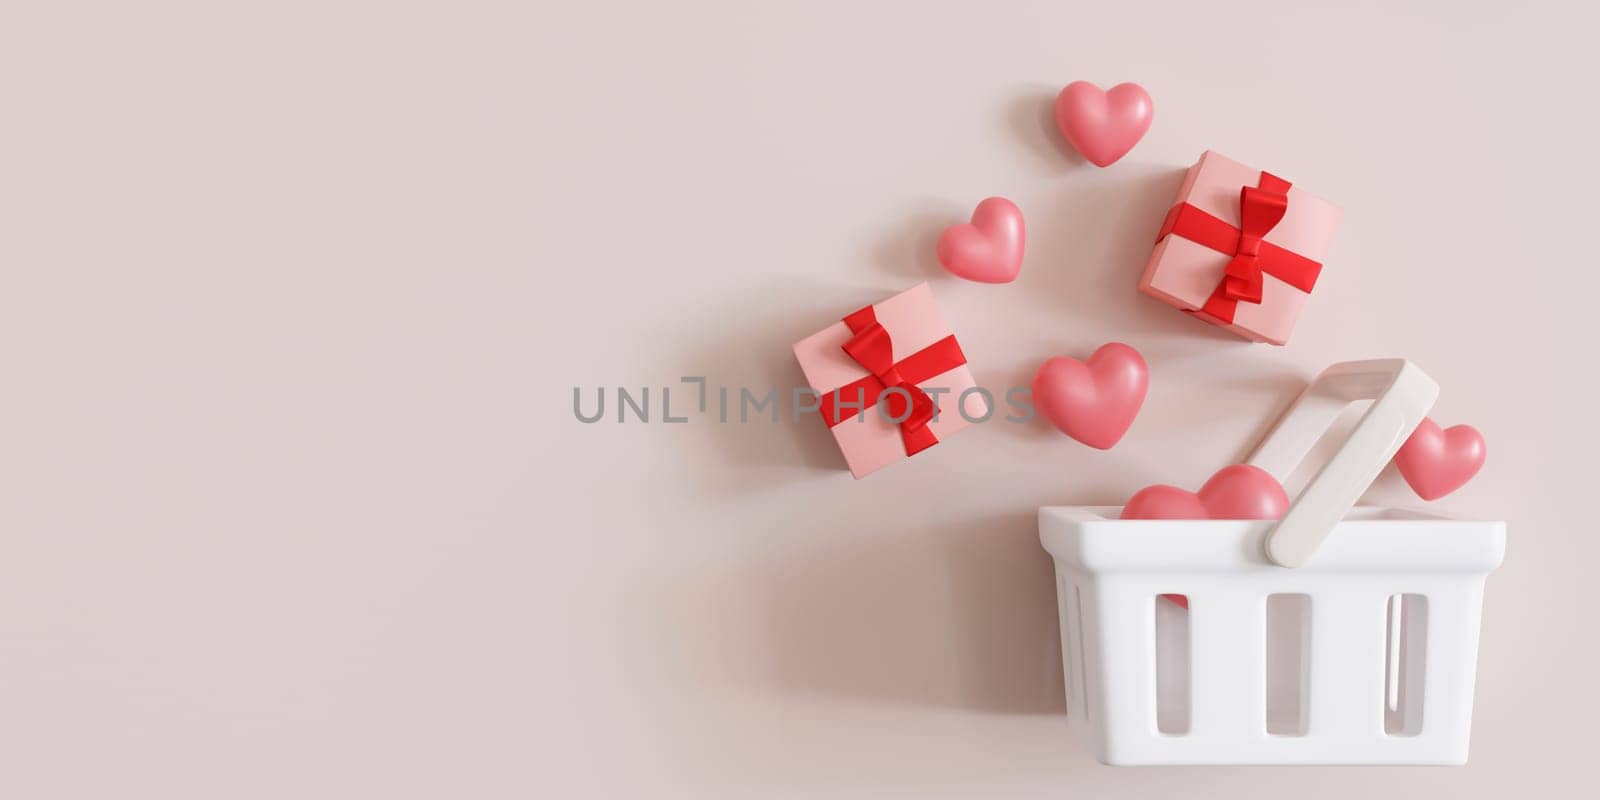 Shopping basket with gift boxes and hearts on beige background with empty space for text, copy space. Buying presents. Valentine's Day, Mother's or Woman's Day shopping, sale. 3D illustration